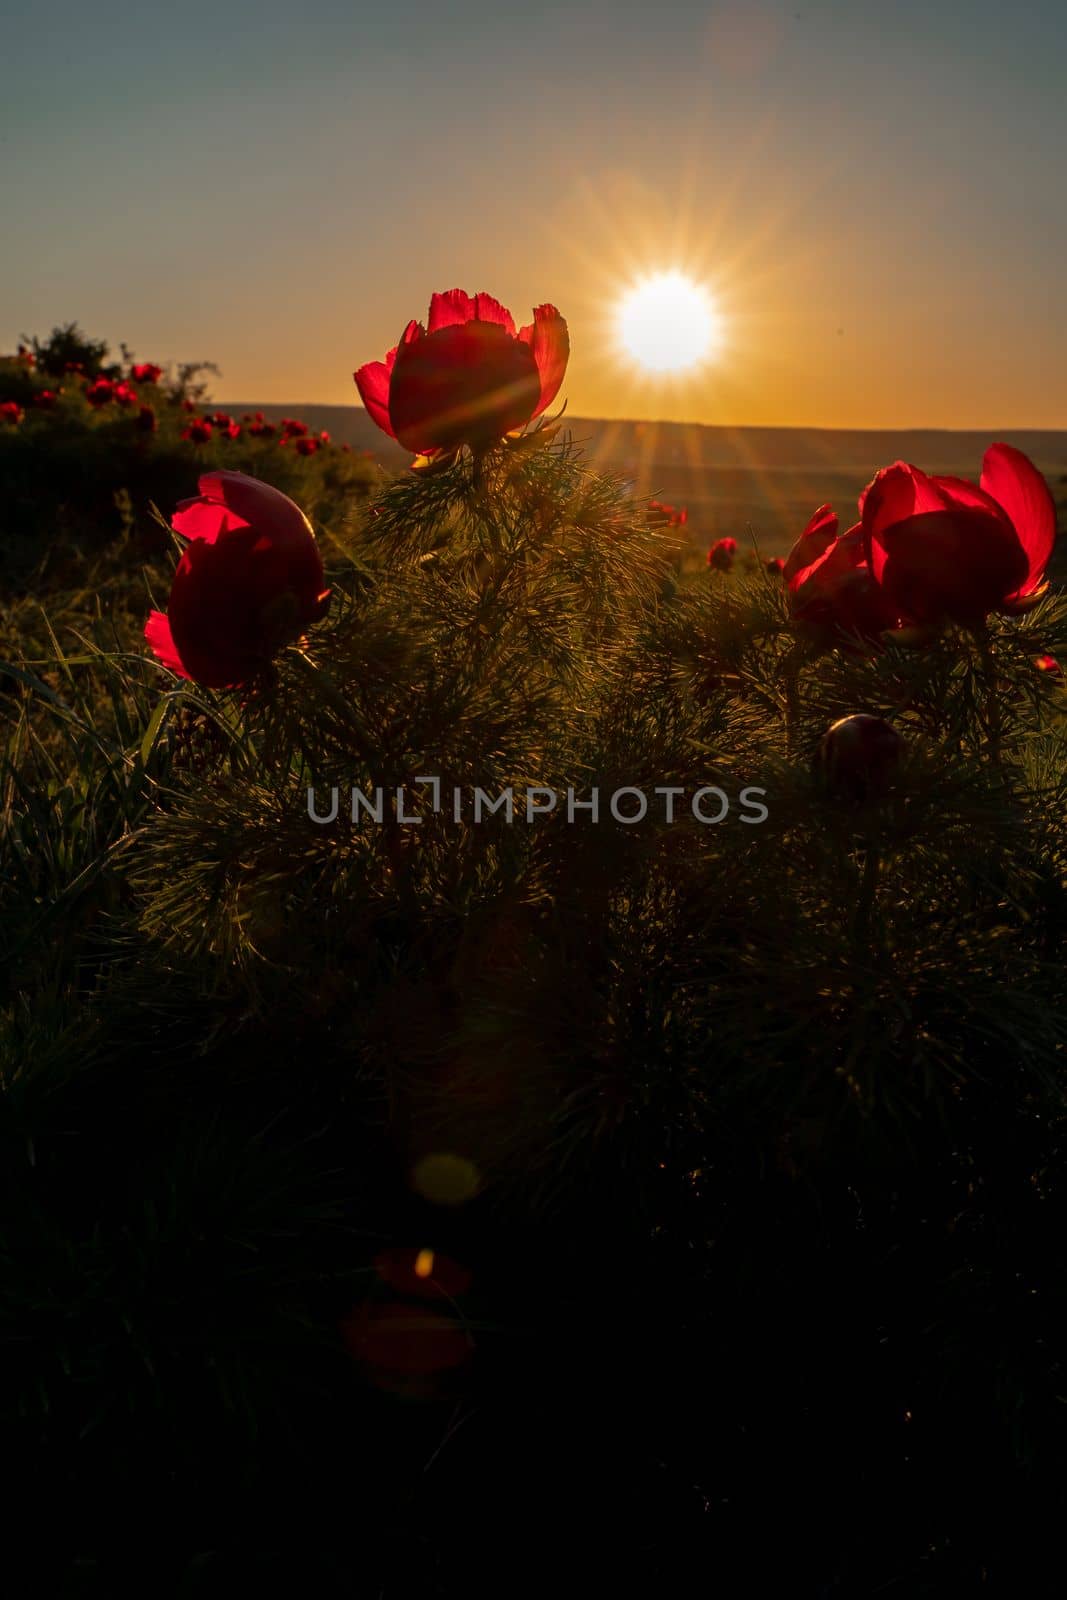 Wild peony is thin leaved Paeonia tenuifolia, in its natural environment against the sunset. Bright decorative flower, popular in garden landscape design selective focus by Matiunina